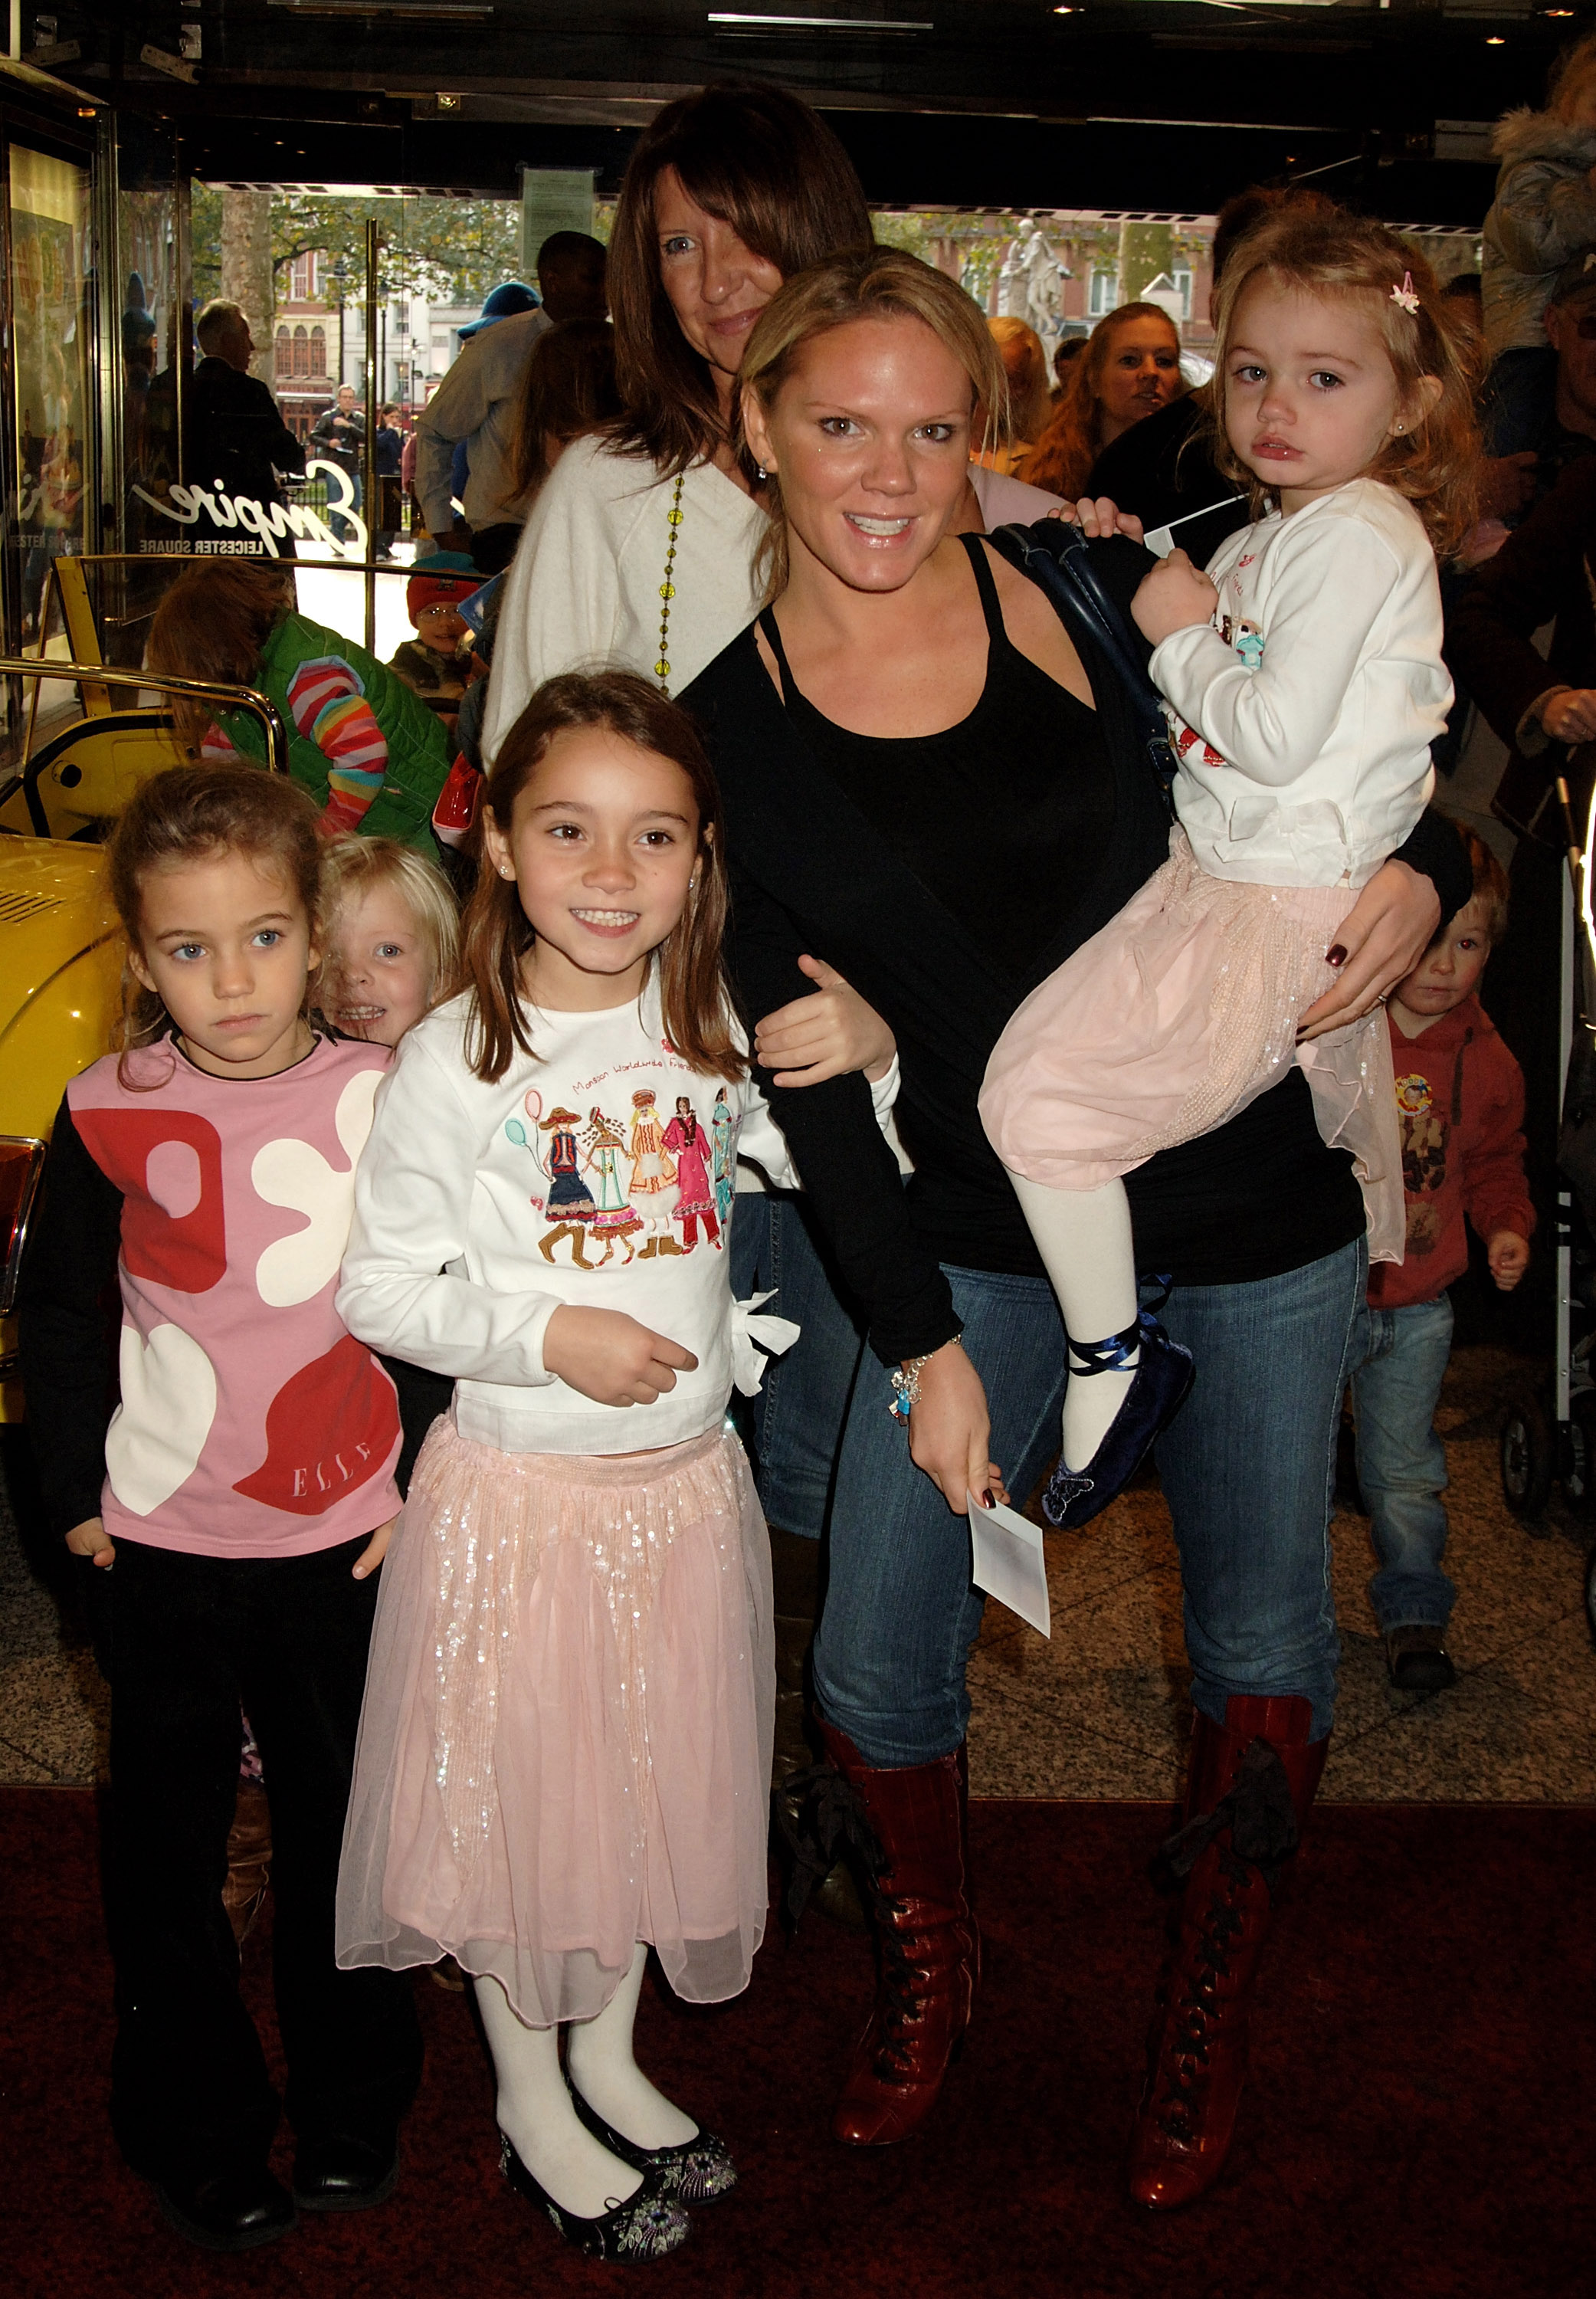 Louise Adams and her daughters Liberty (L), Talula (R), and other children at the Charity DVD premiere for "Noddy and the Island Adventure" on October 23, 2005, in London, England | Source: Getty Images